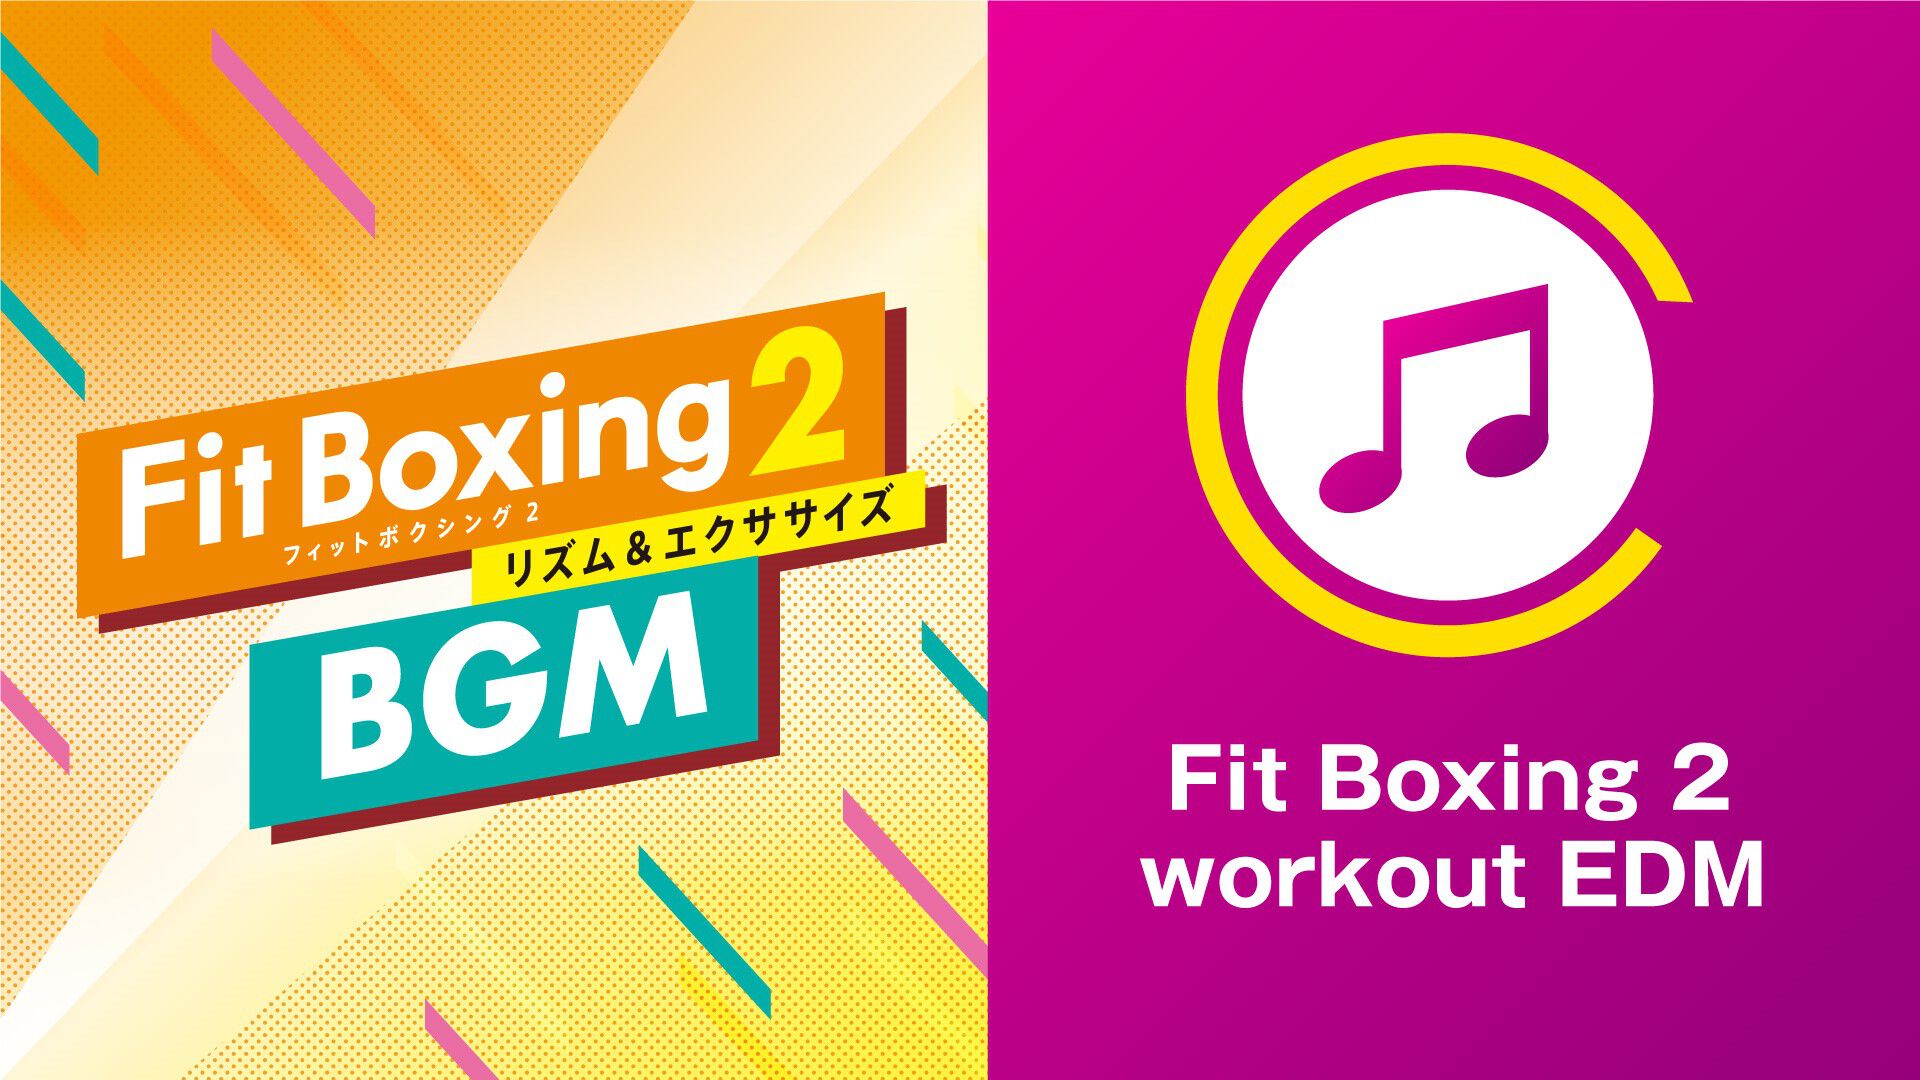 Fit Boxing 2 workout EDM | My Nintendo Store（マイニンテンドーストア）